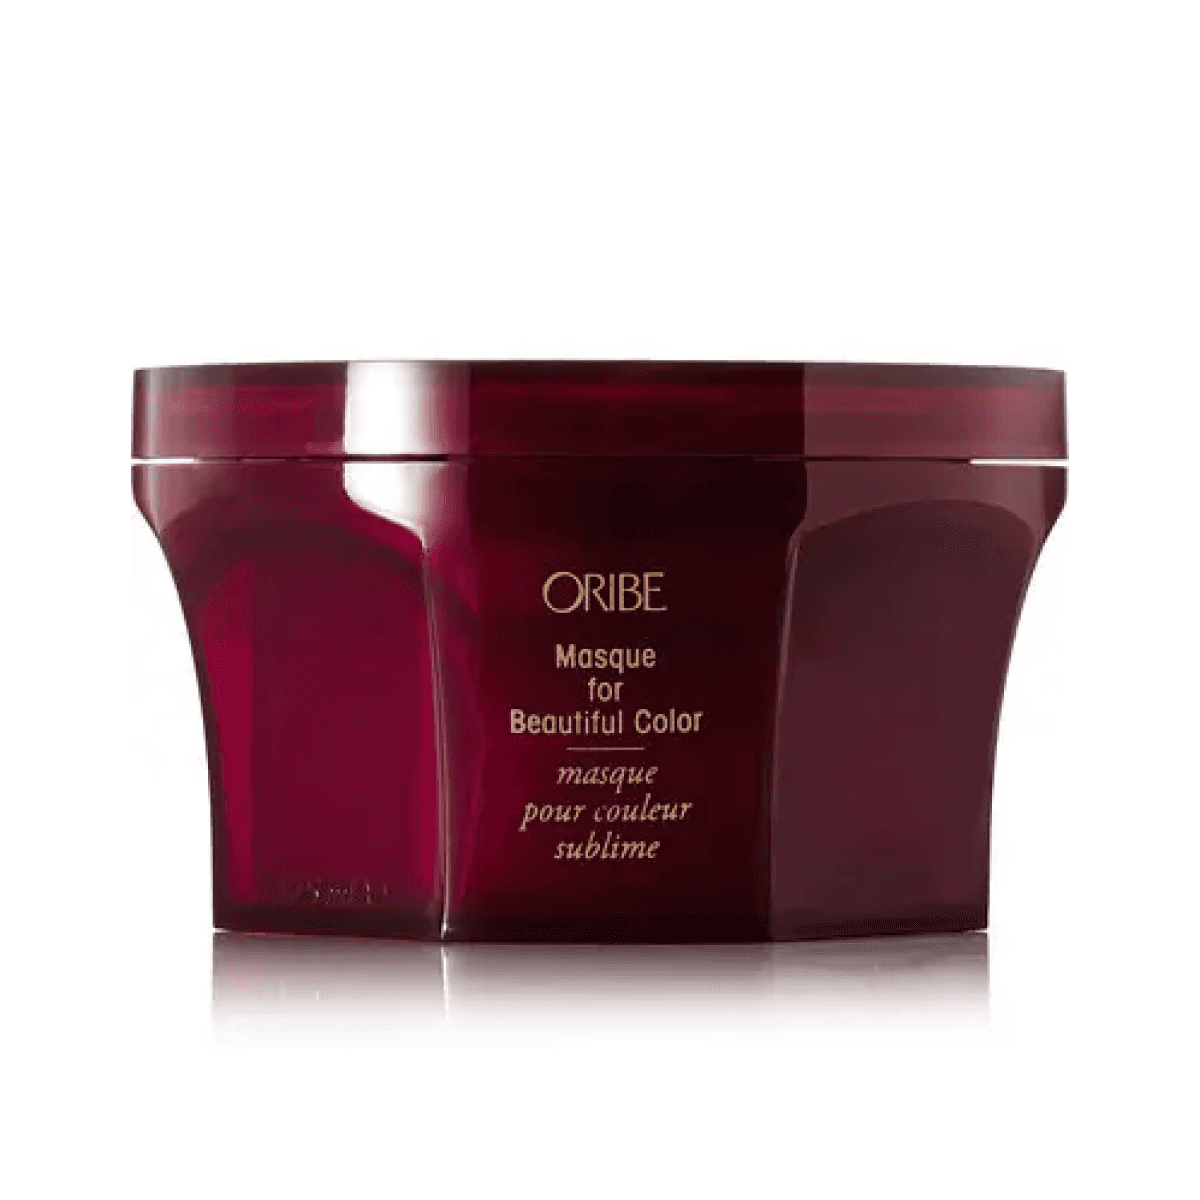 Masque for Beautiful Color